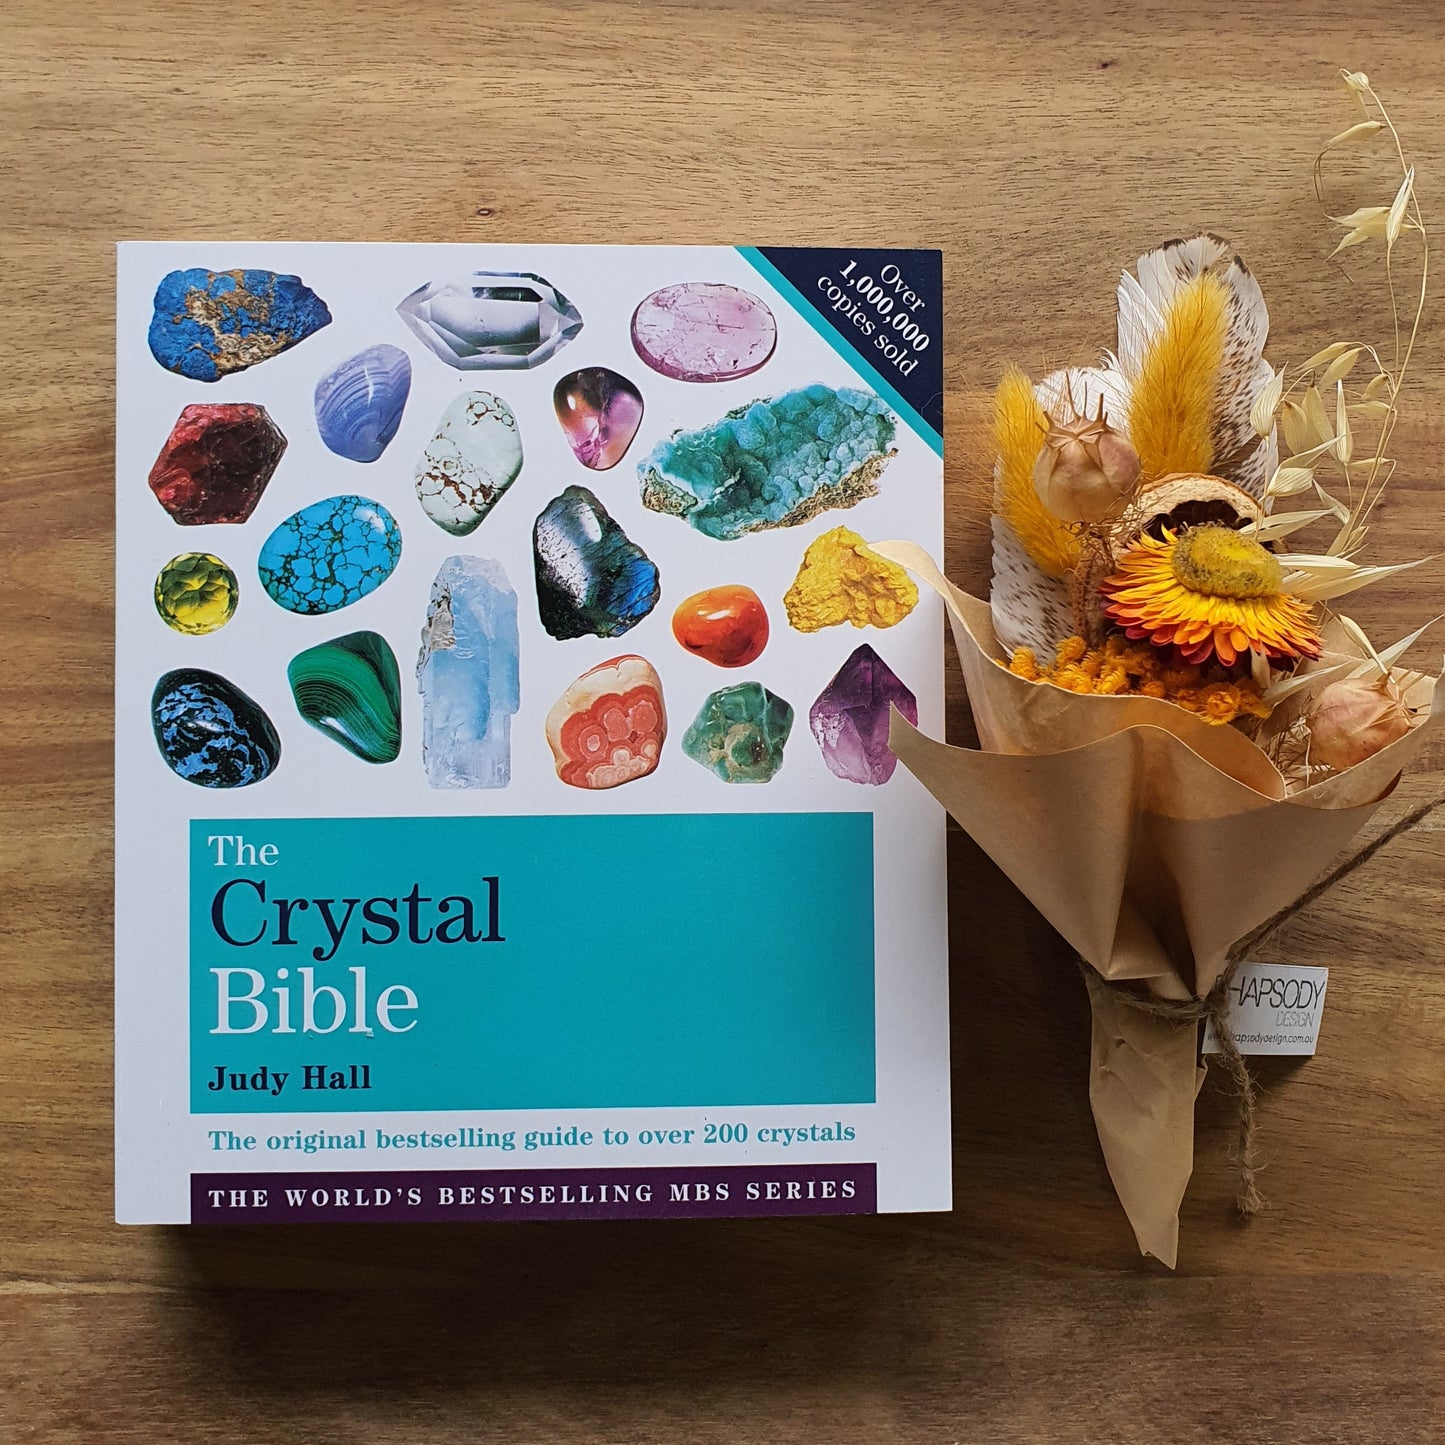 The Crystal Bible - Volume 1